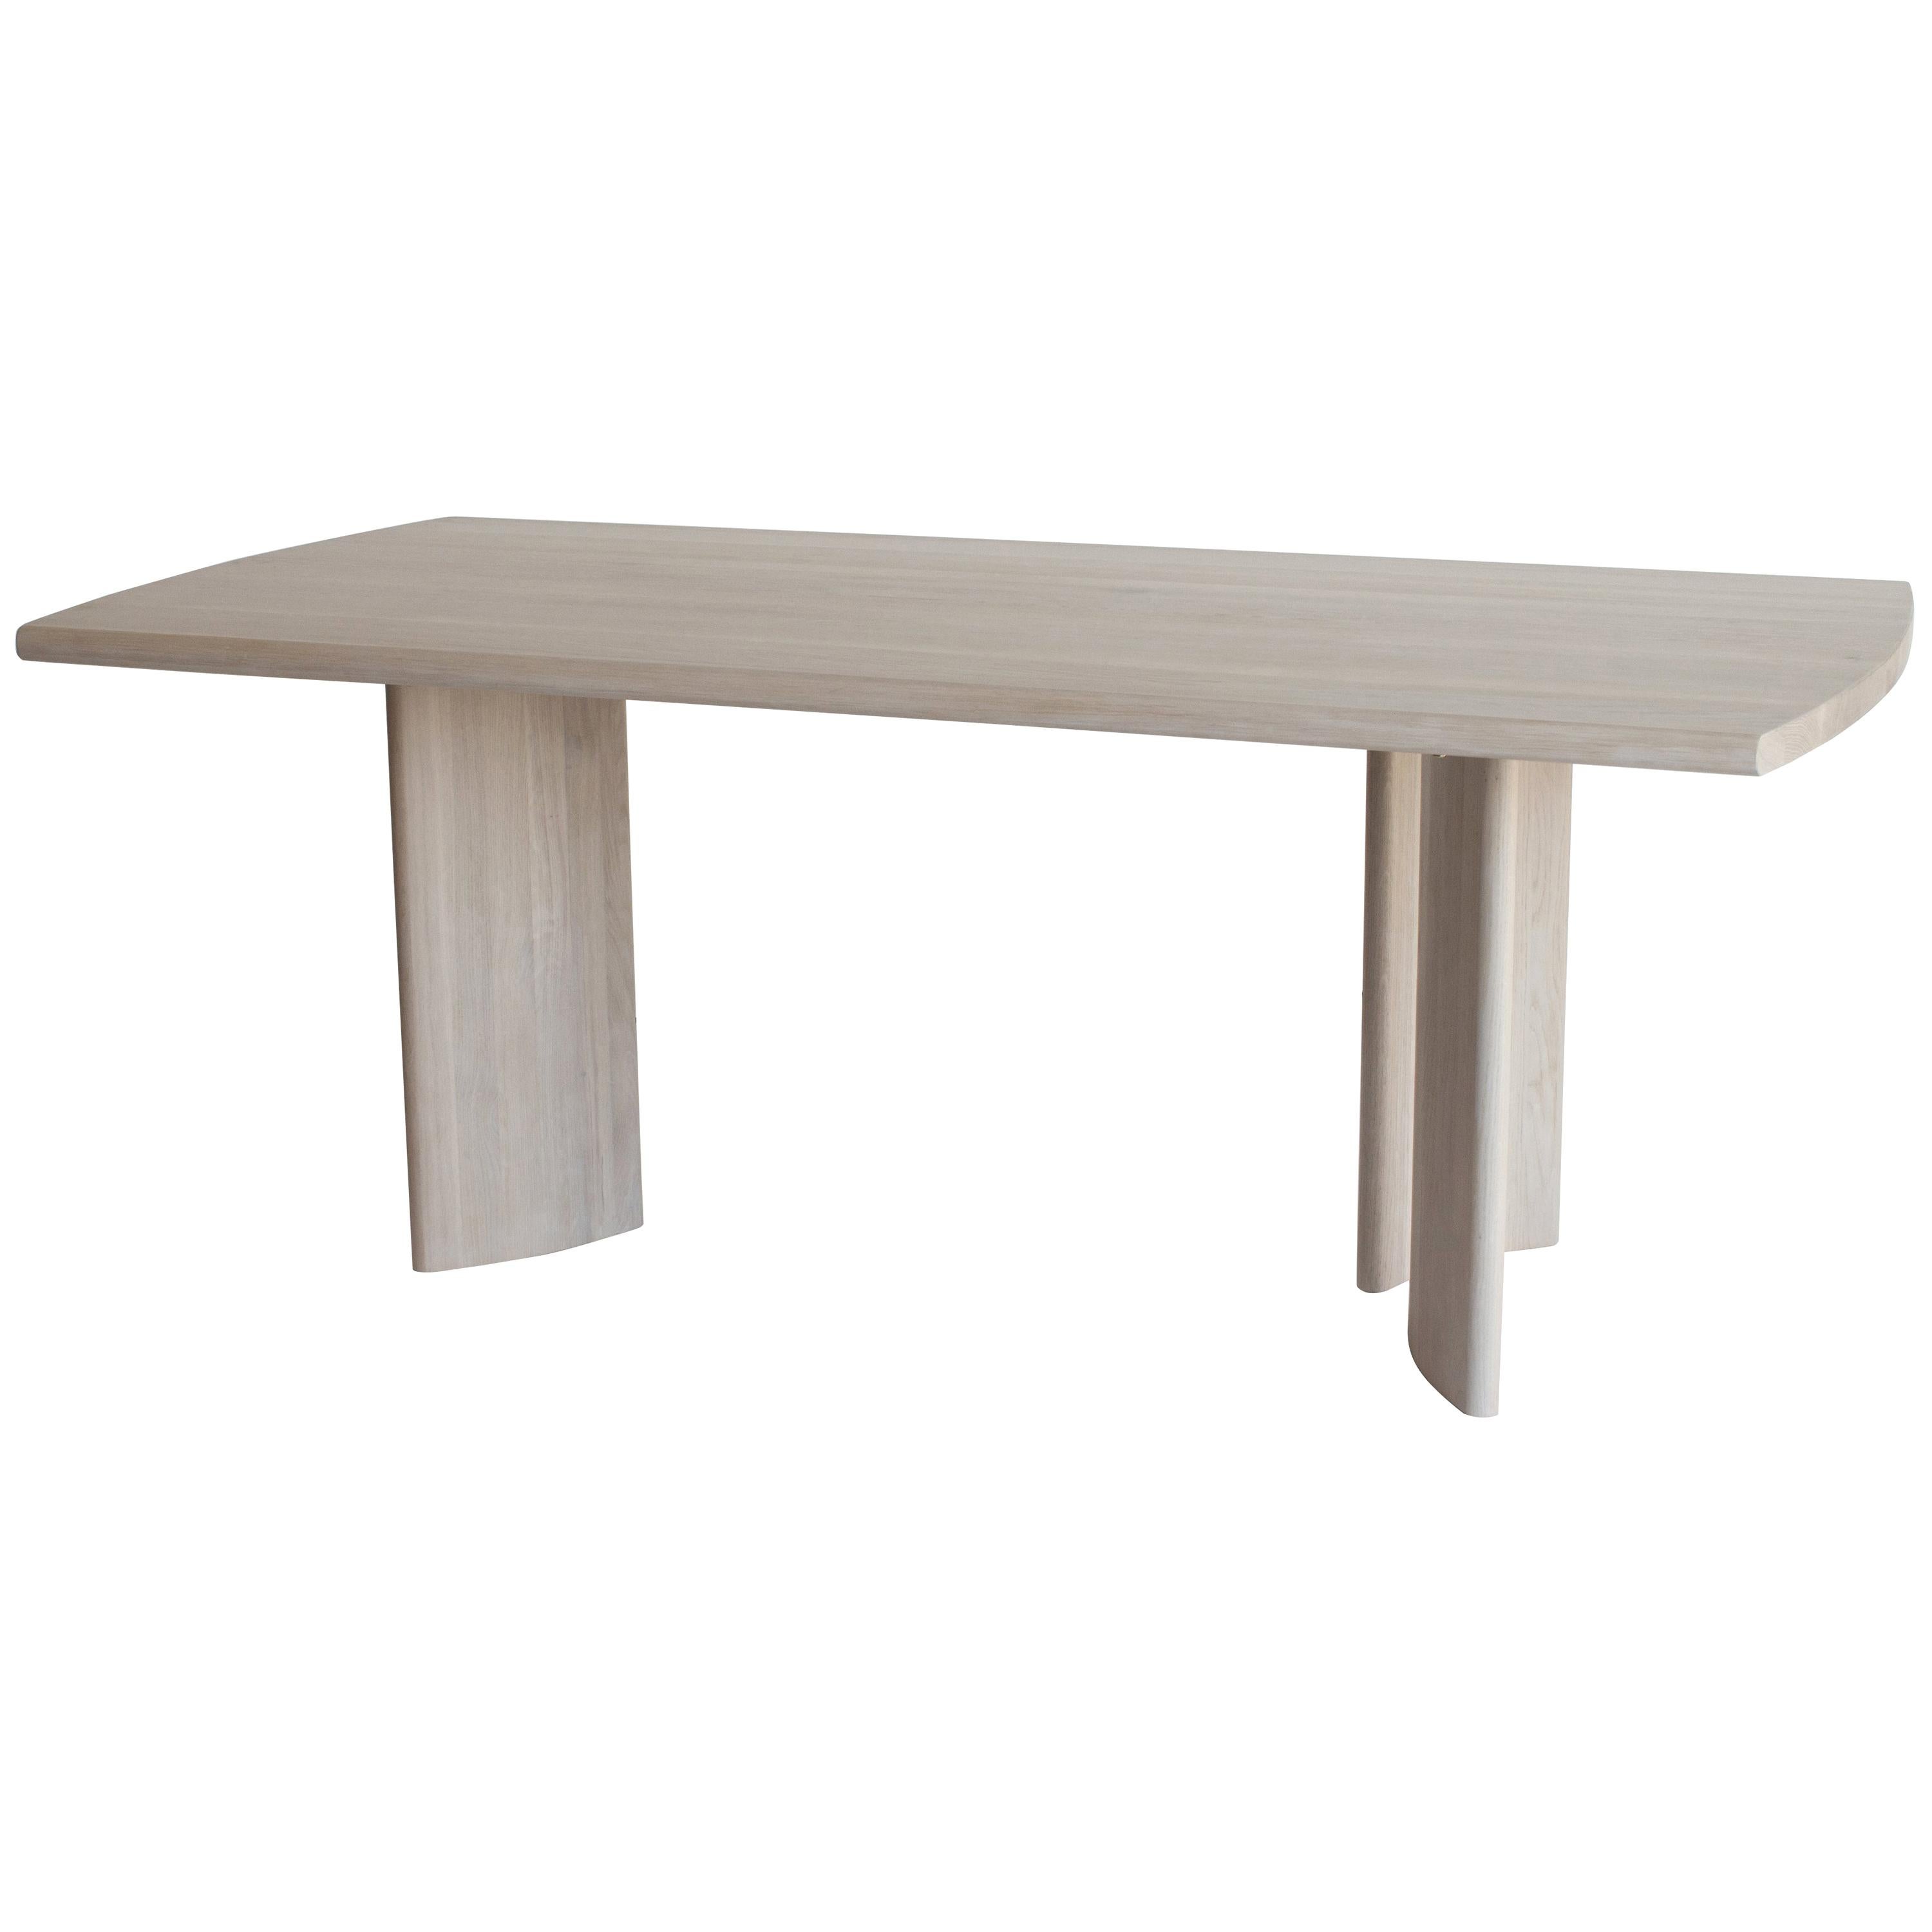 Crest Table by Sun at Six, Nude, Minimalist Dining Table in Wood